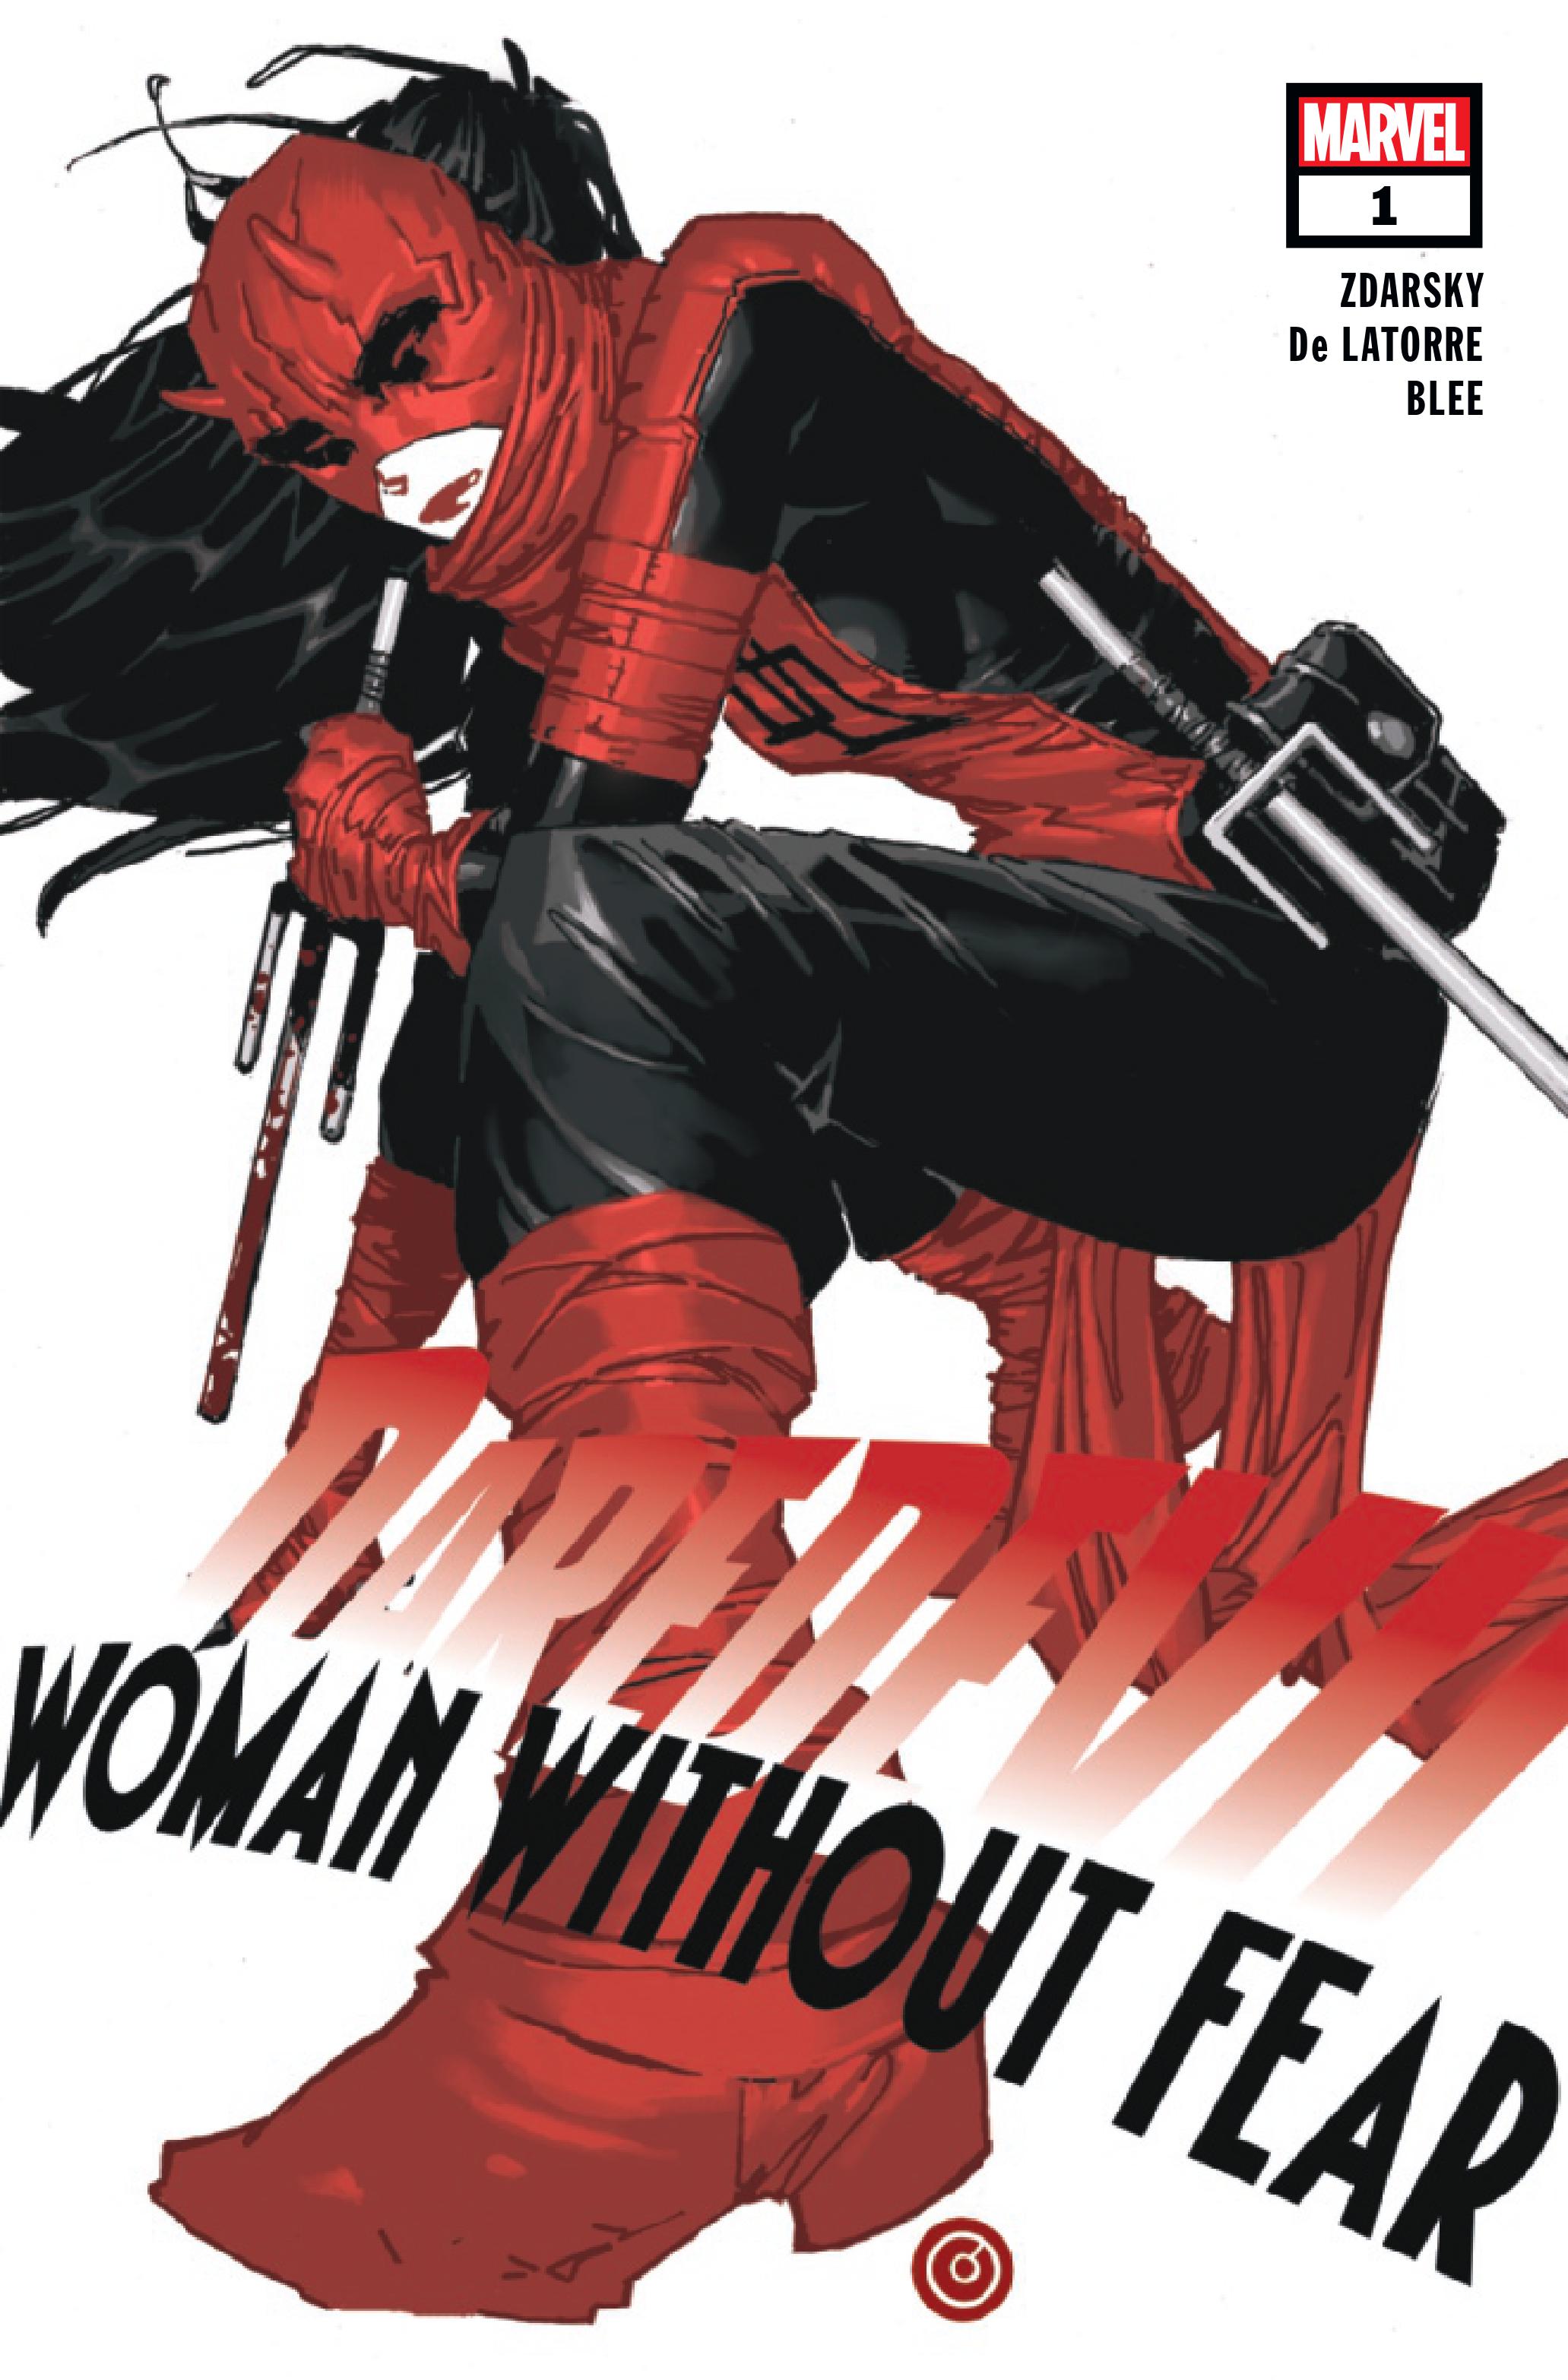 DD: Woman Without Fear #1